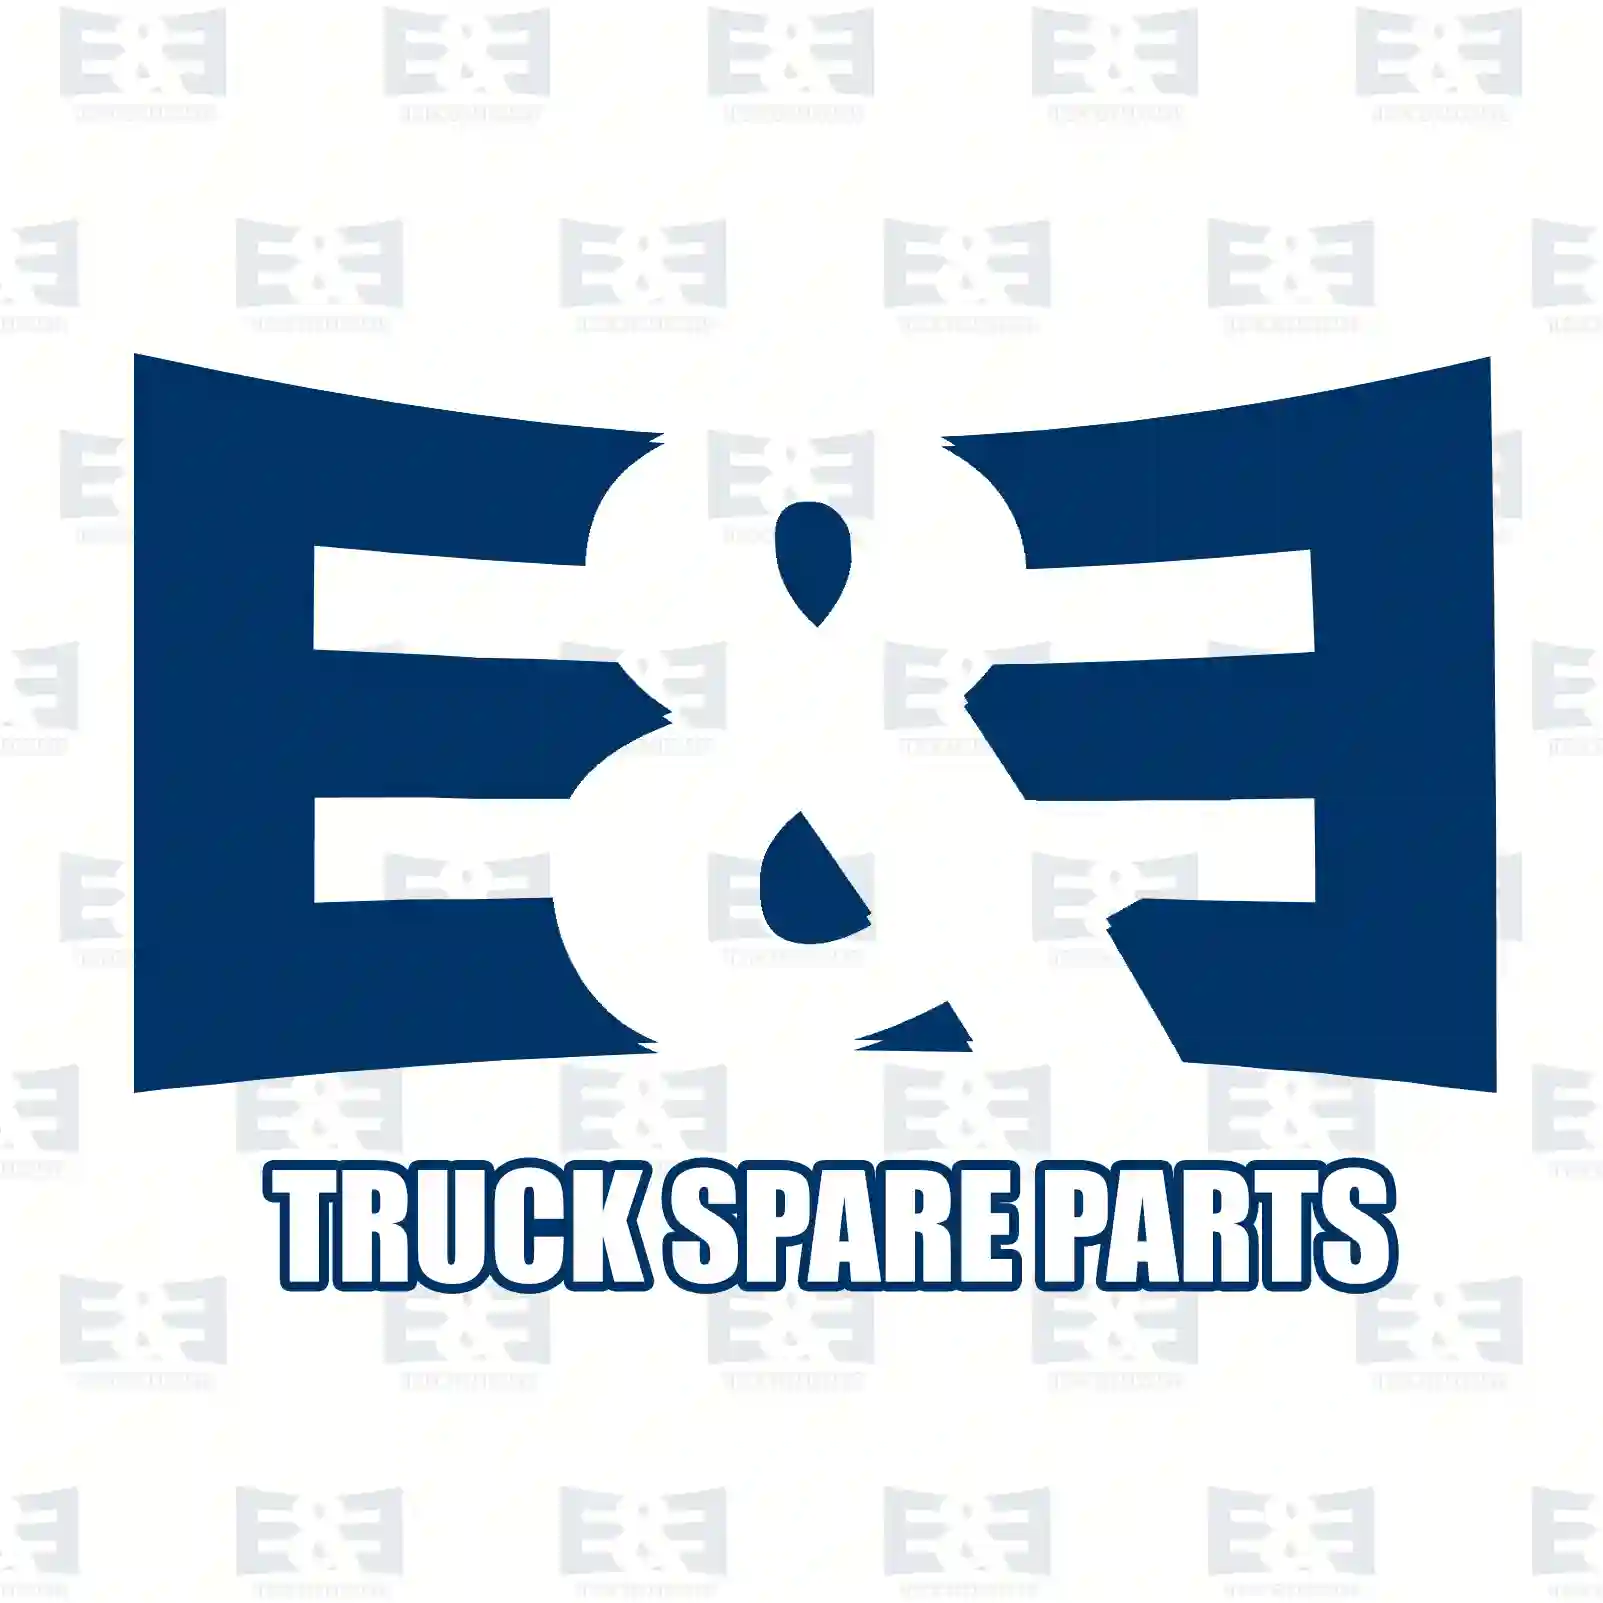  Gasket kit, injection nozzle || E&E Truck Spare Parts | Truck Spare Parts, Auotomotive Spare Parts